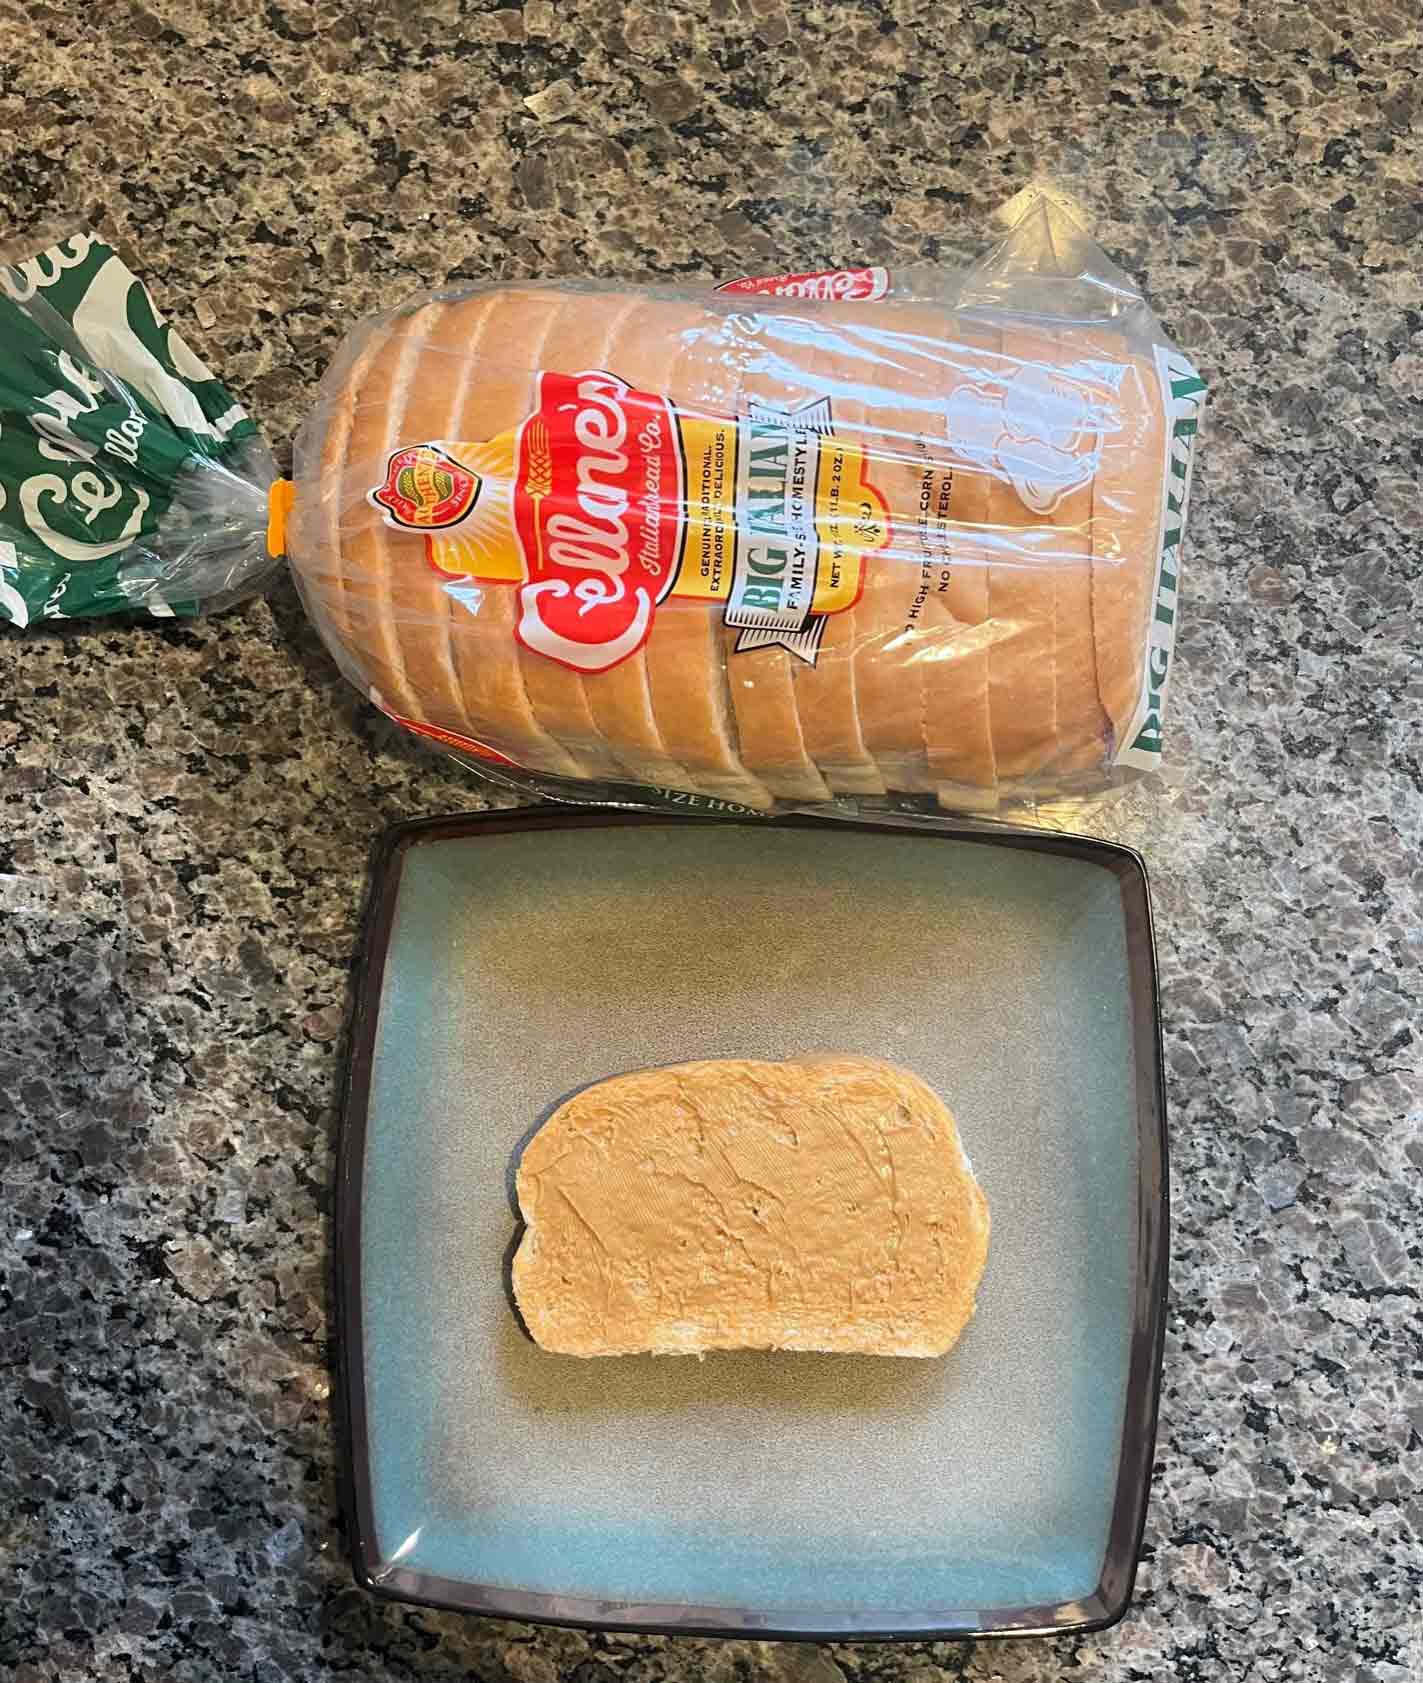 Bread with Peanut butter